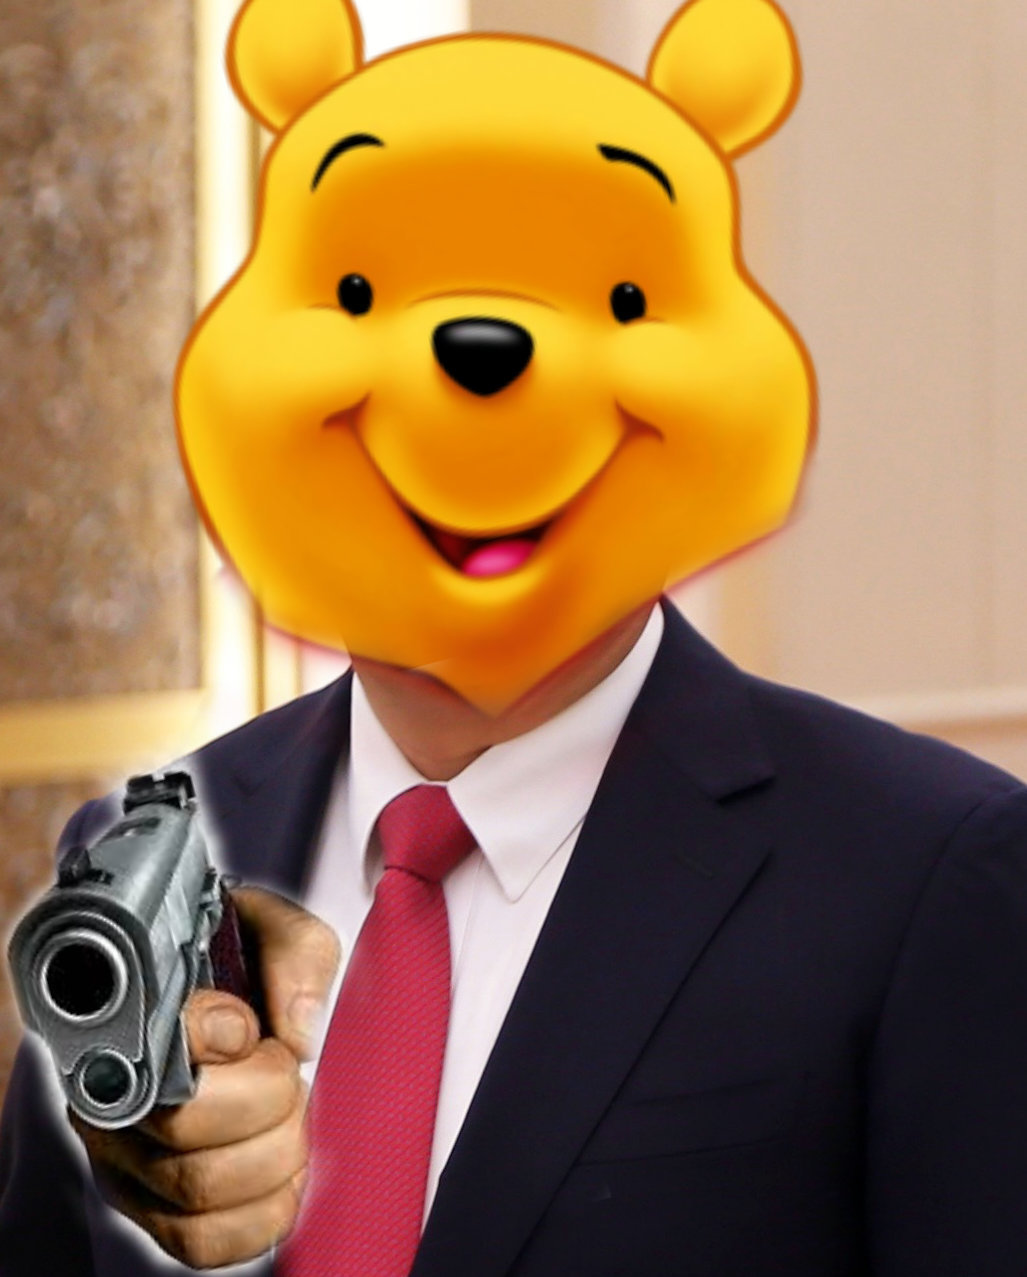 le winnie pooh jinping chinois politic xi pistolet